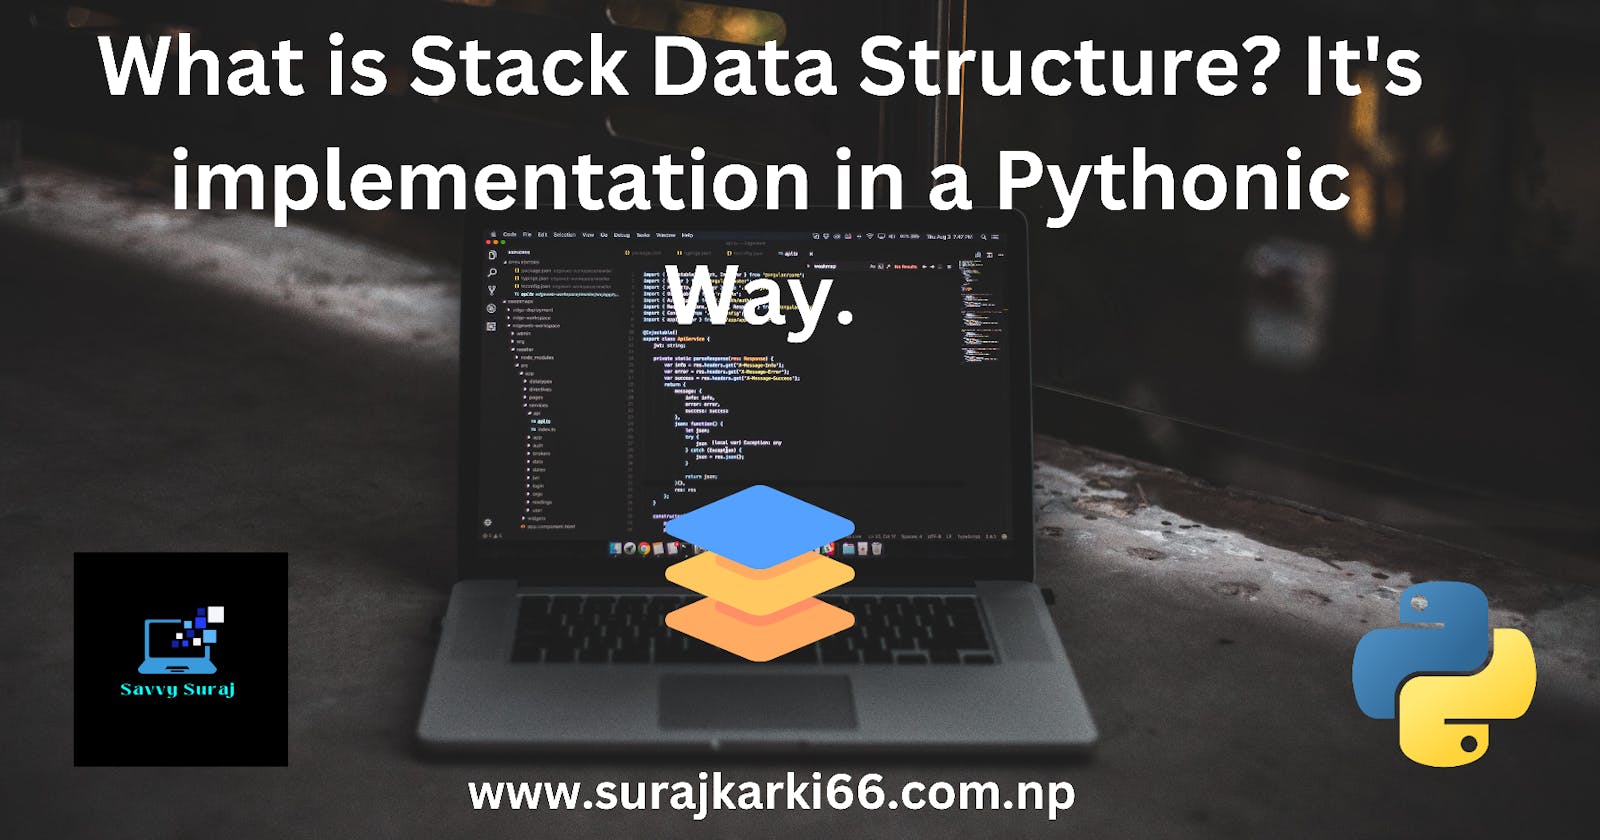 What is Stack Data Structure? It's implementation in a Pythonic Way.